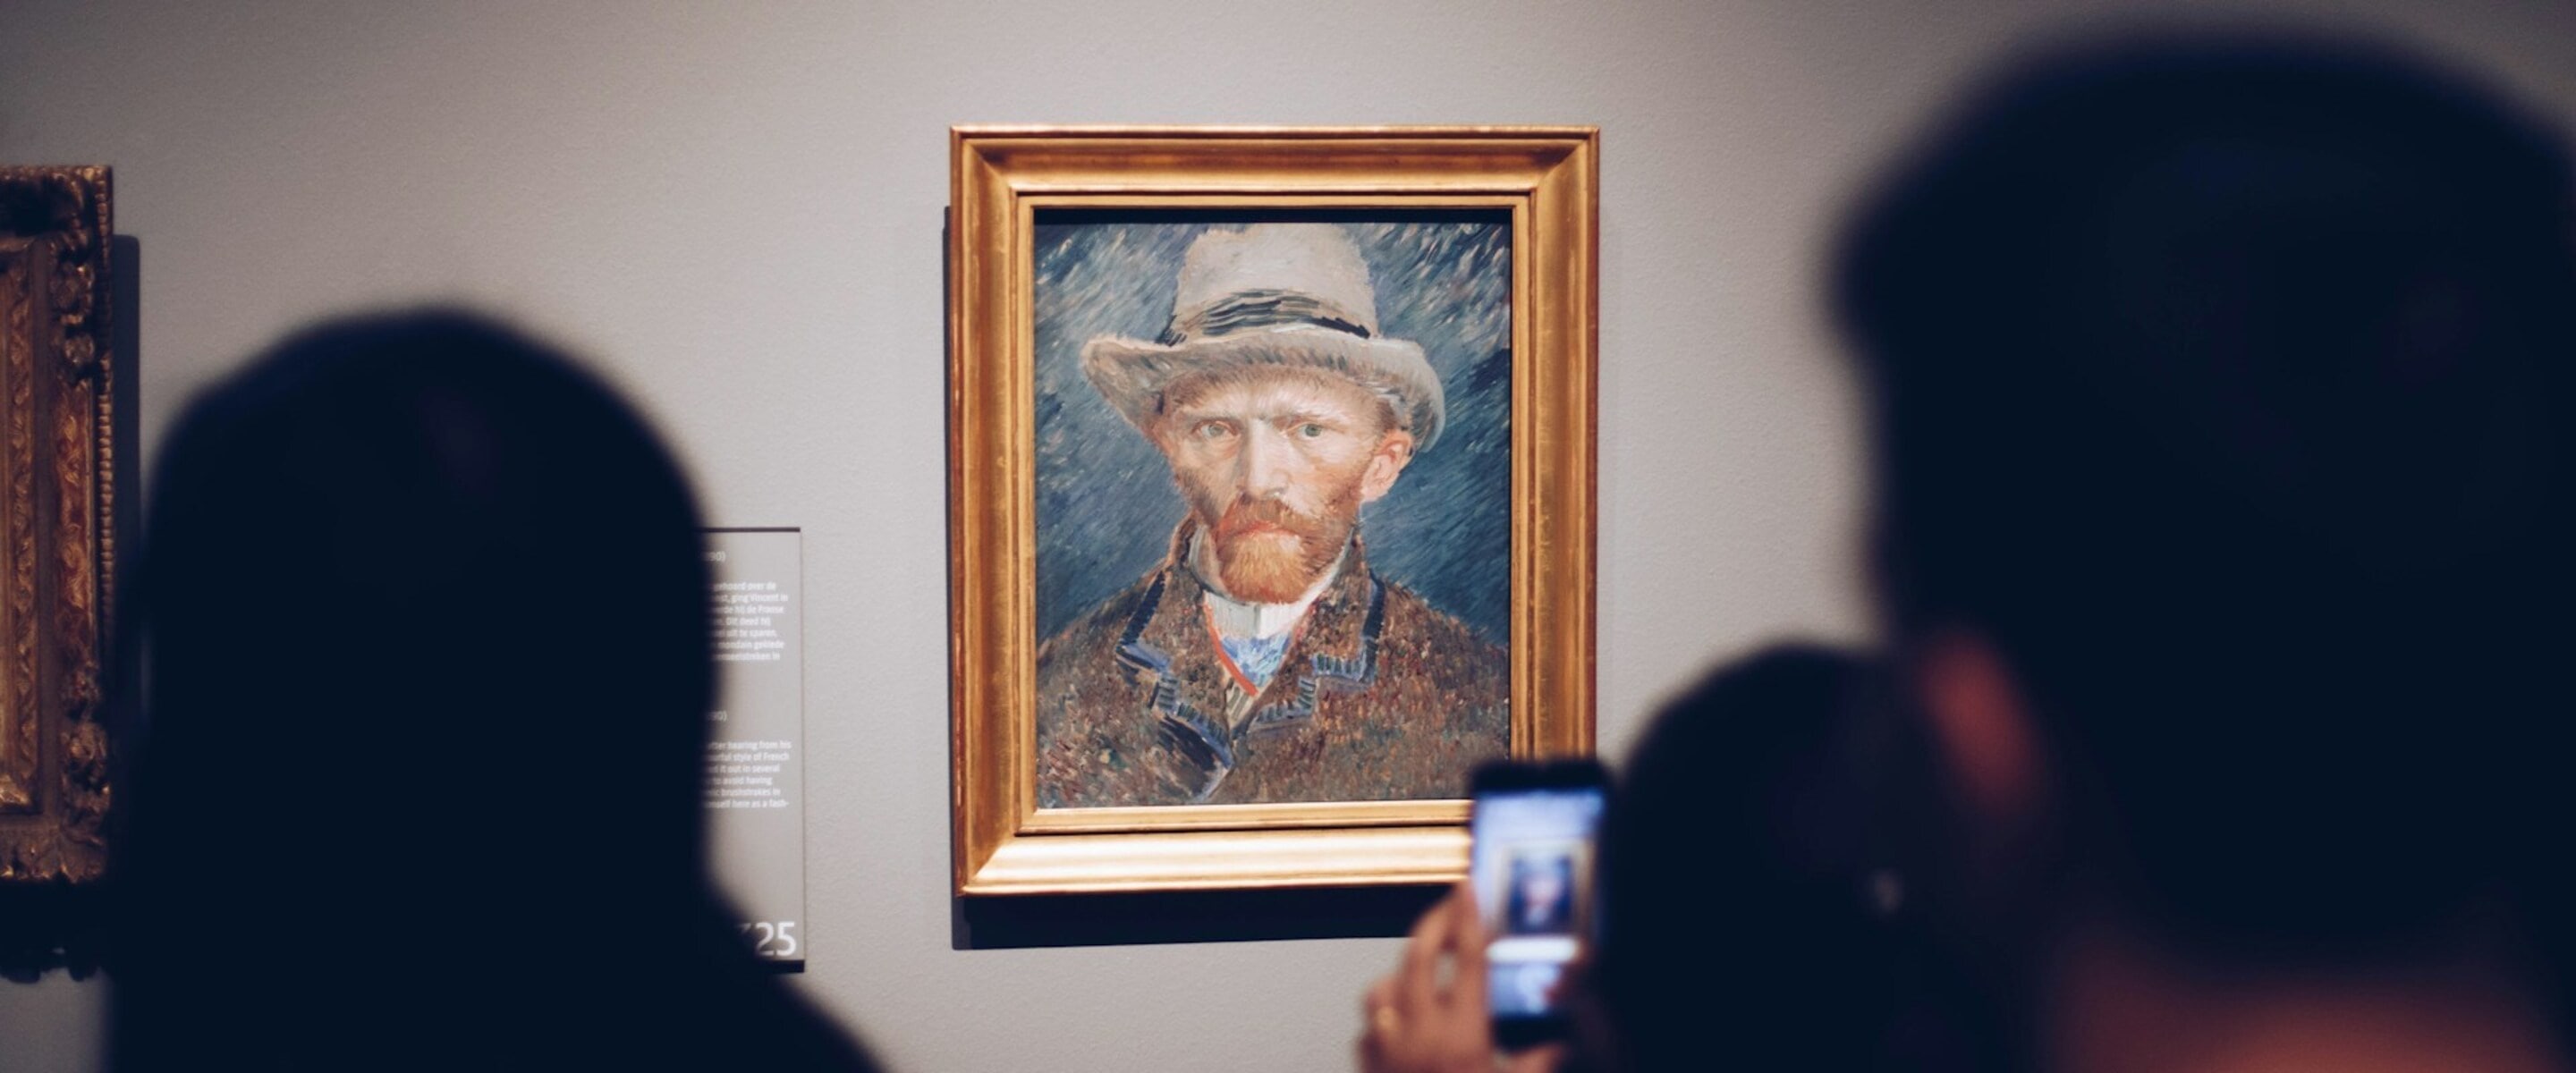 Vincent Van Gogh, Godfather of the Flexitarian Diet: "Be Sure to Eat Well"